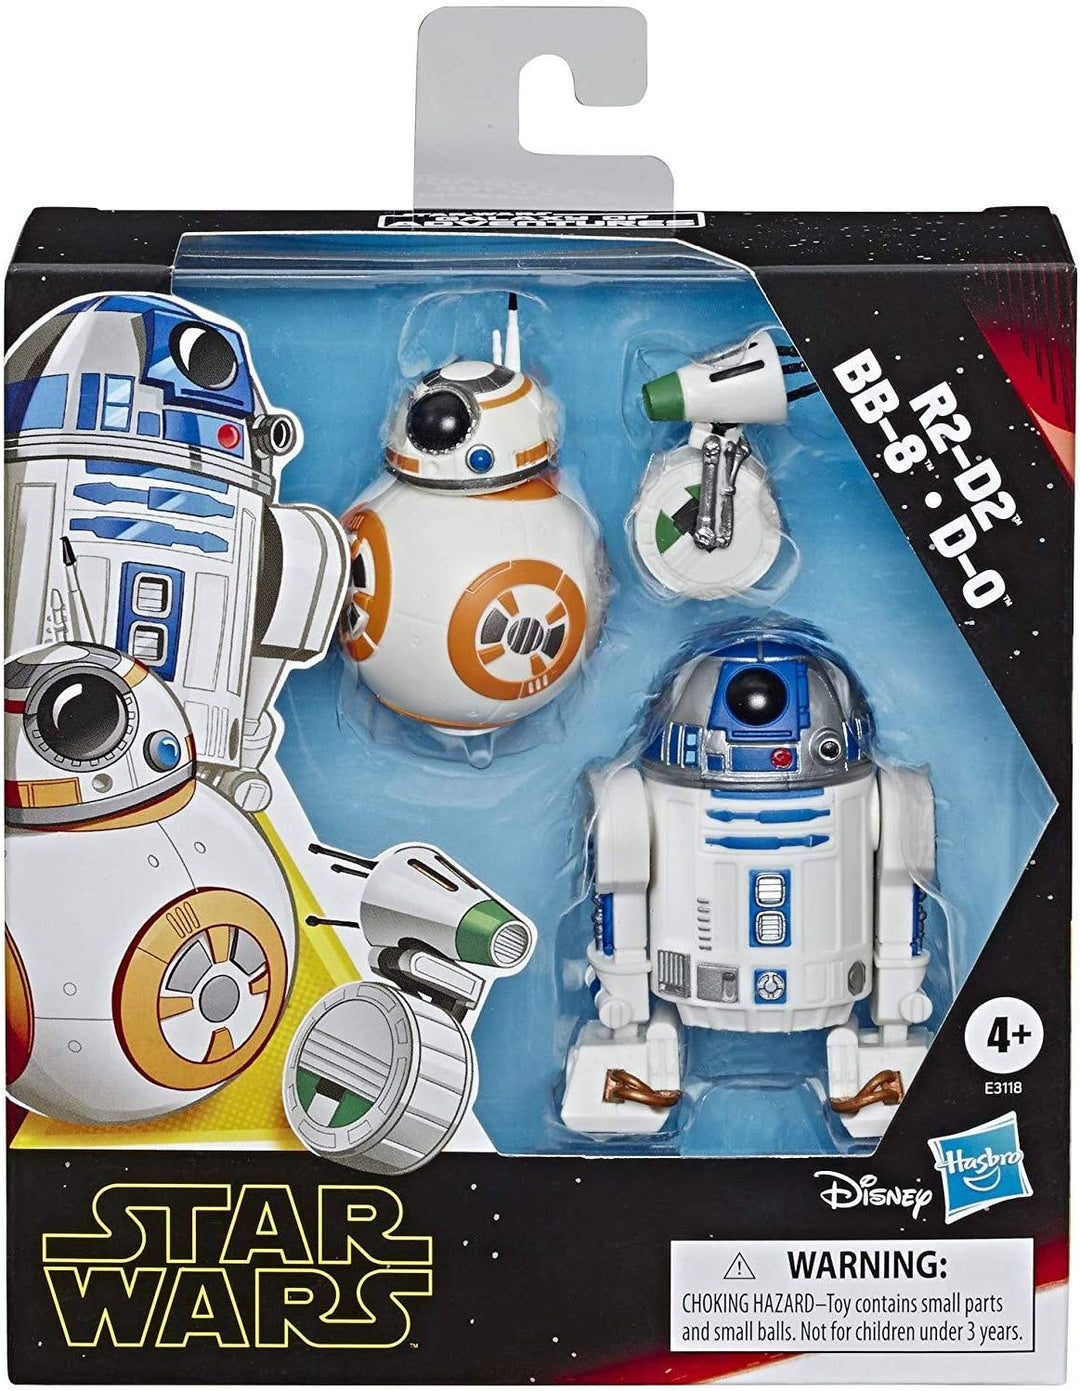 Star Wars Galaxy of Adventures Droids R2-D2, BB-8, D-O Action Figure 3-Pack